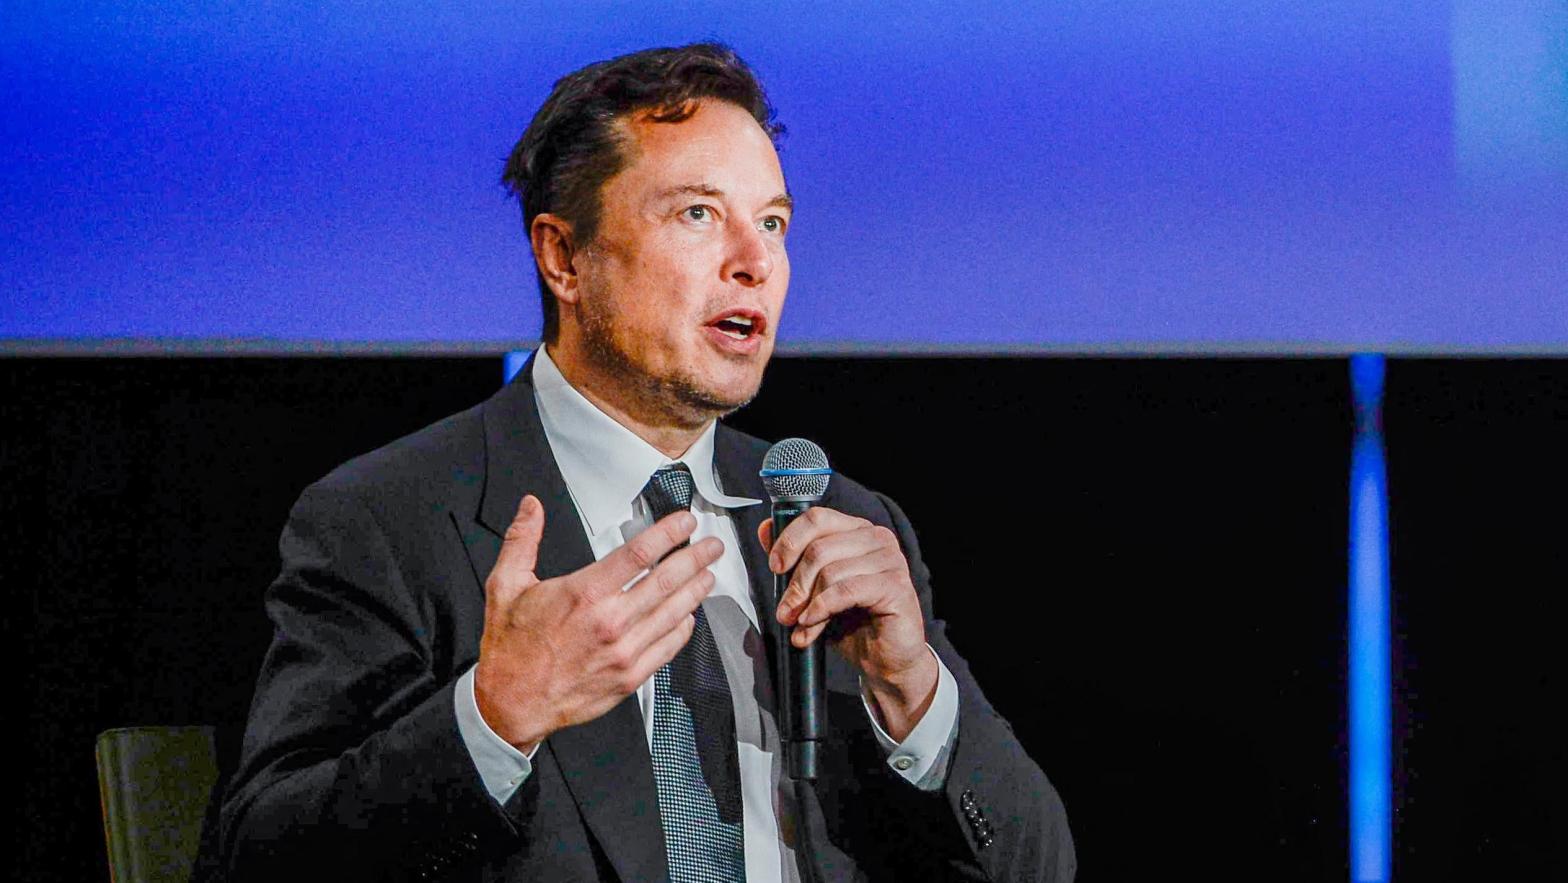 Tesla CEO Elon Musk speaks at the Offshore  Northern Seas 2022 (ONS) meeting in Stavanger, Norway on August 29,  2022. (Photo: Carina Johansen / NTB / AFP, Getty Images)